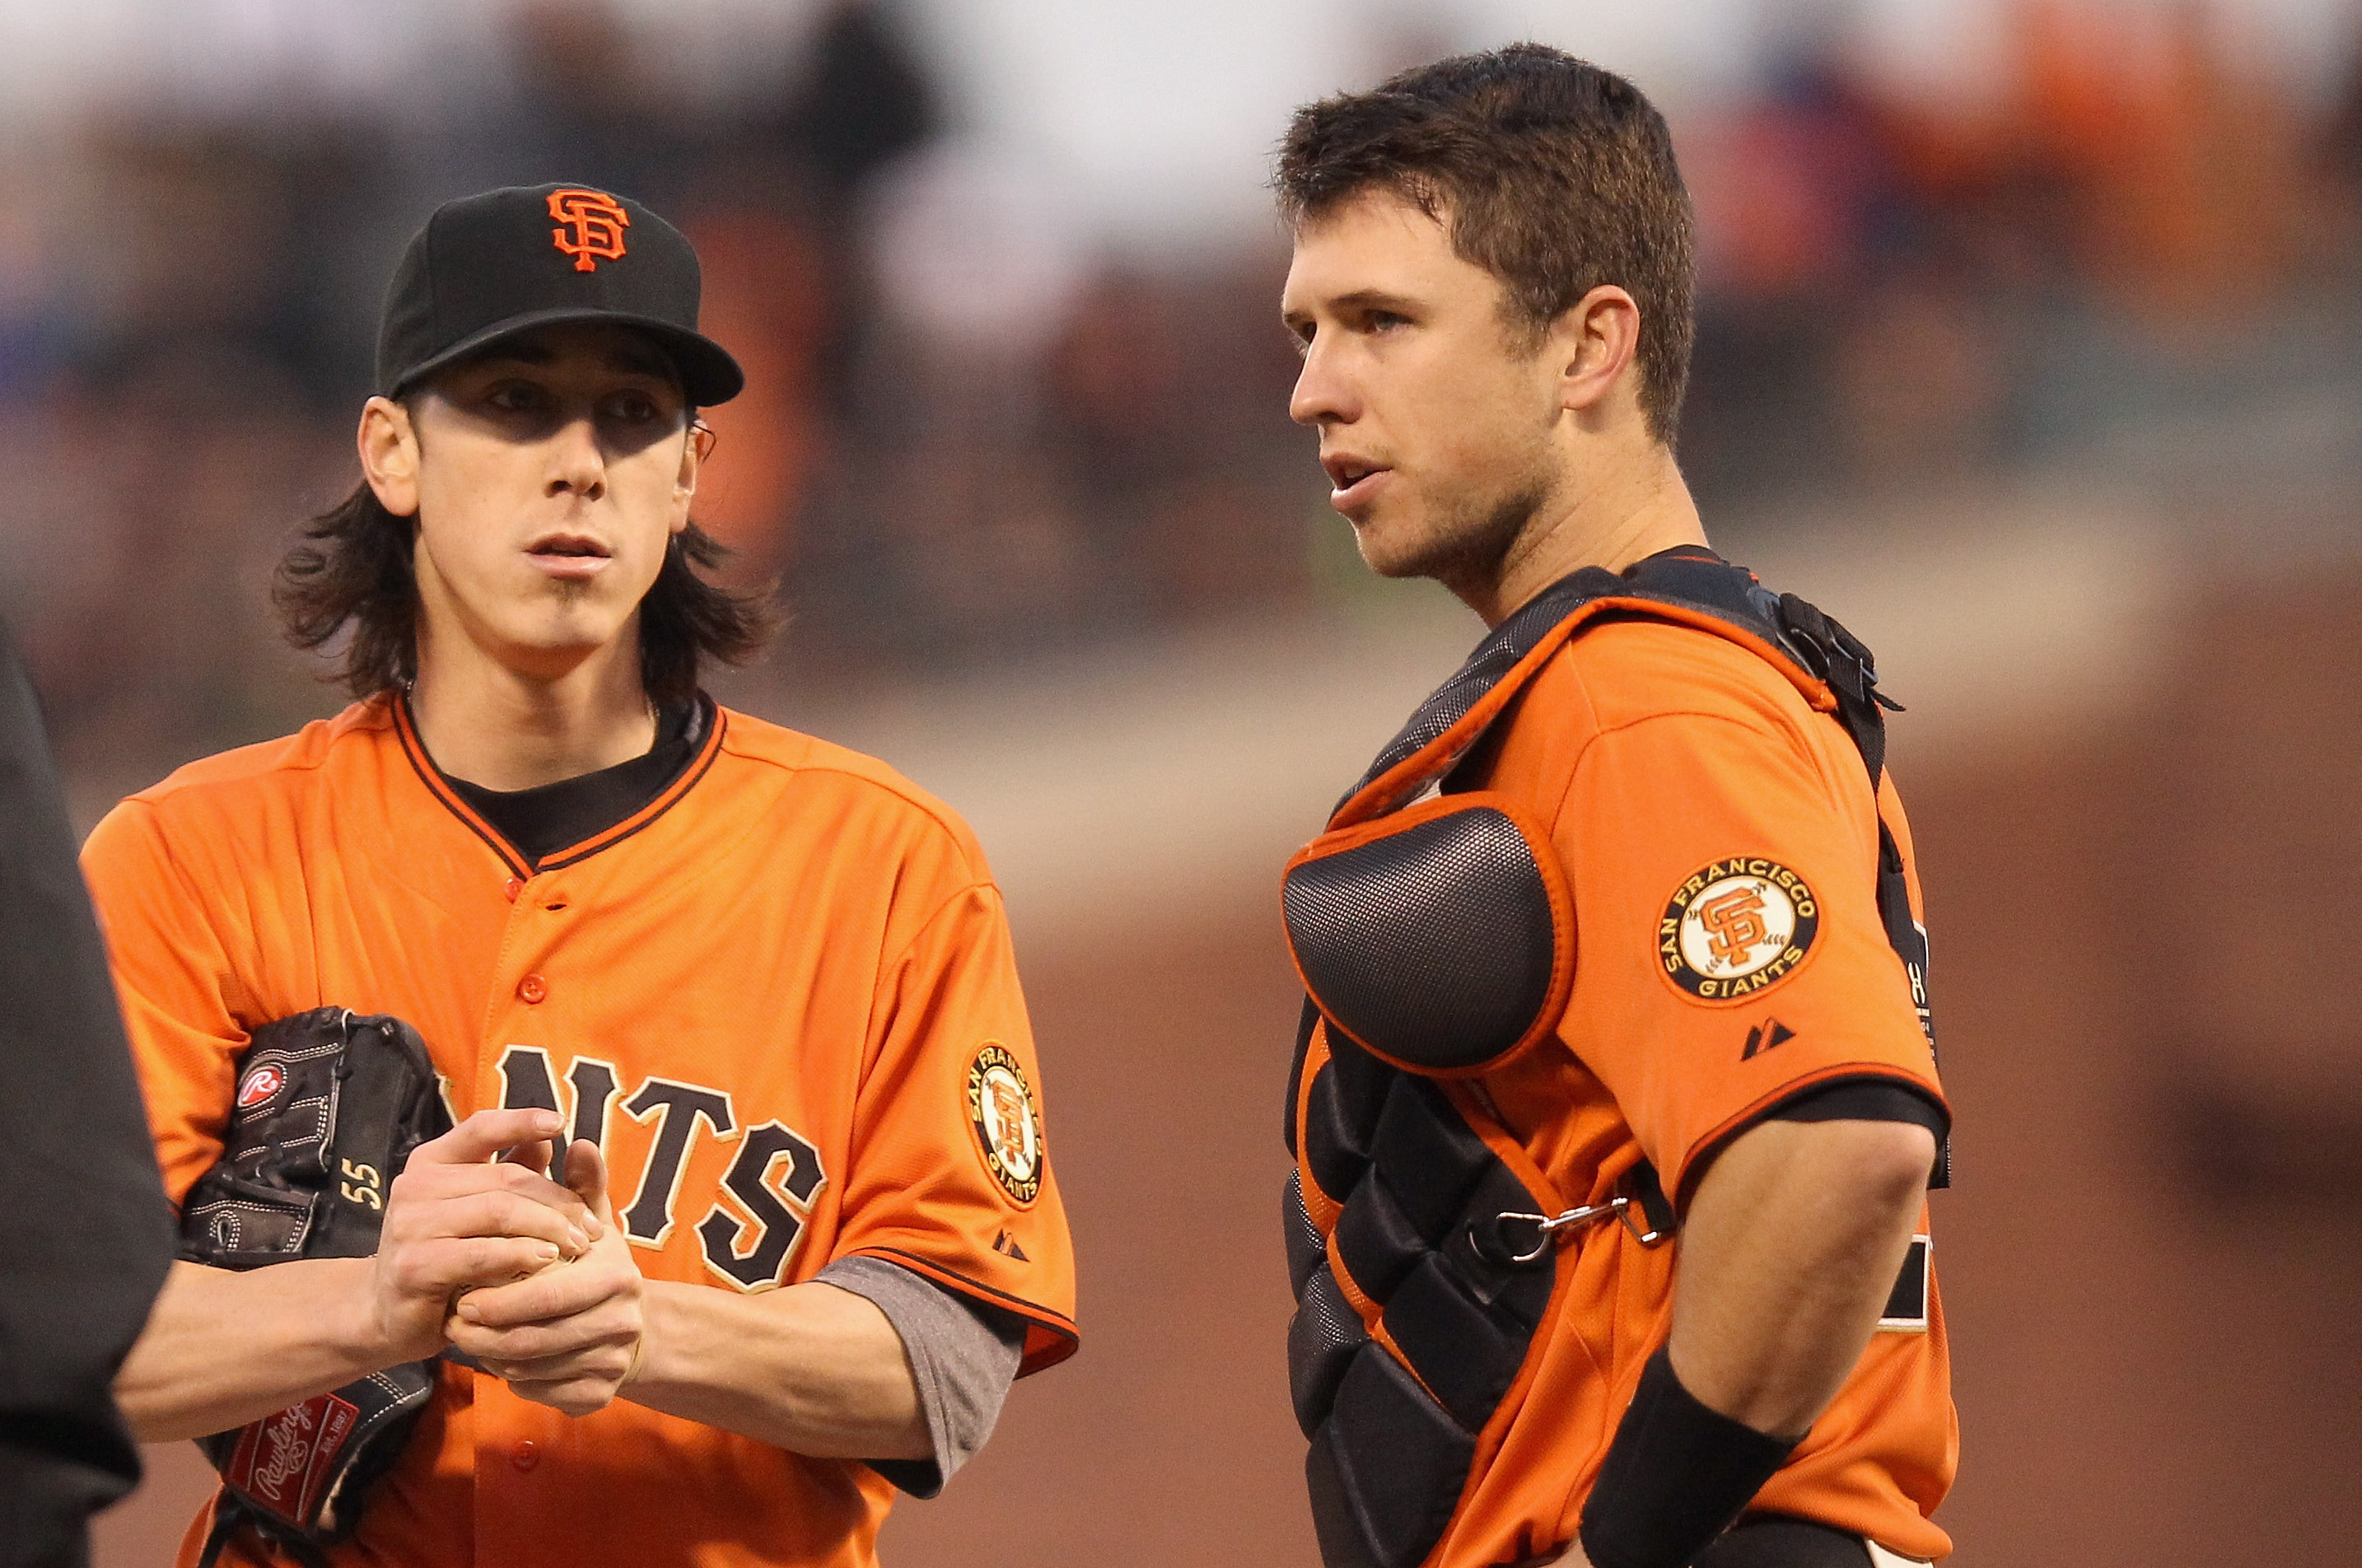 Giants' Tim Lincecum Has the Intangibles, but So Much More - The